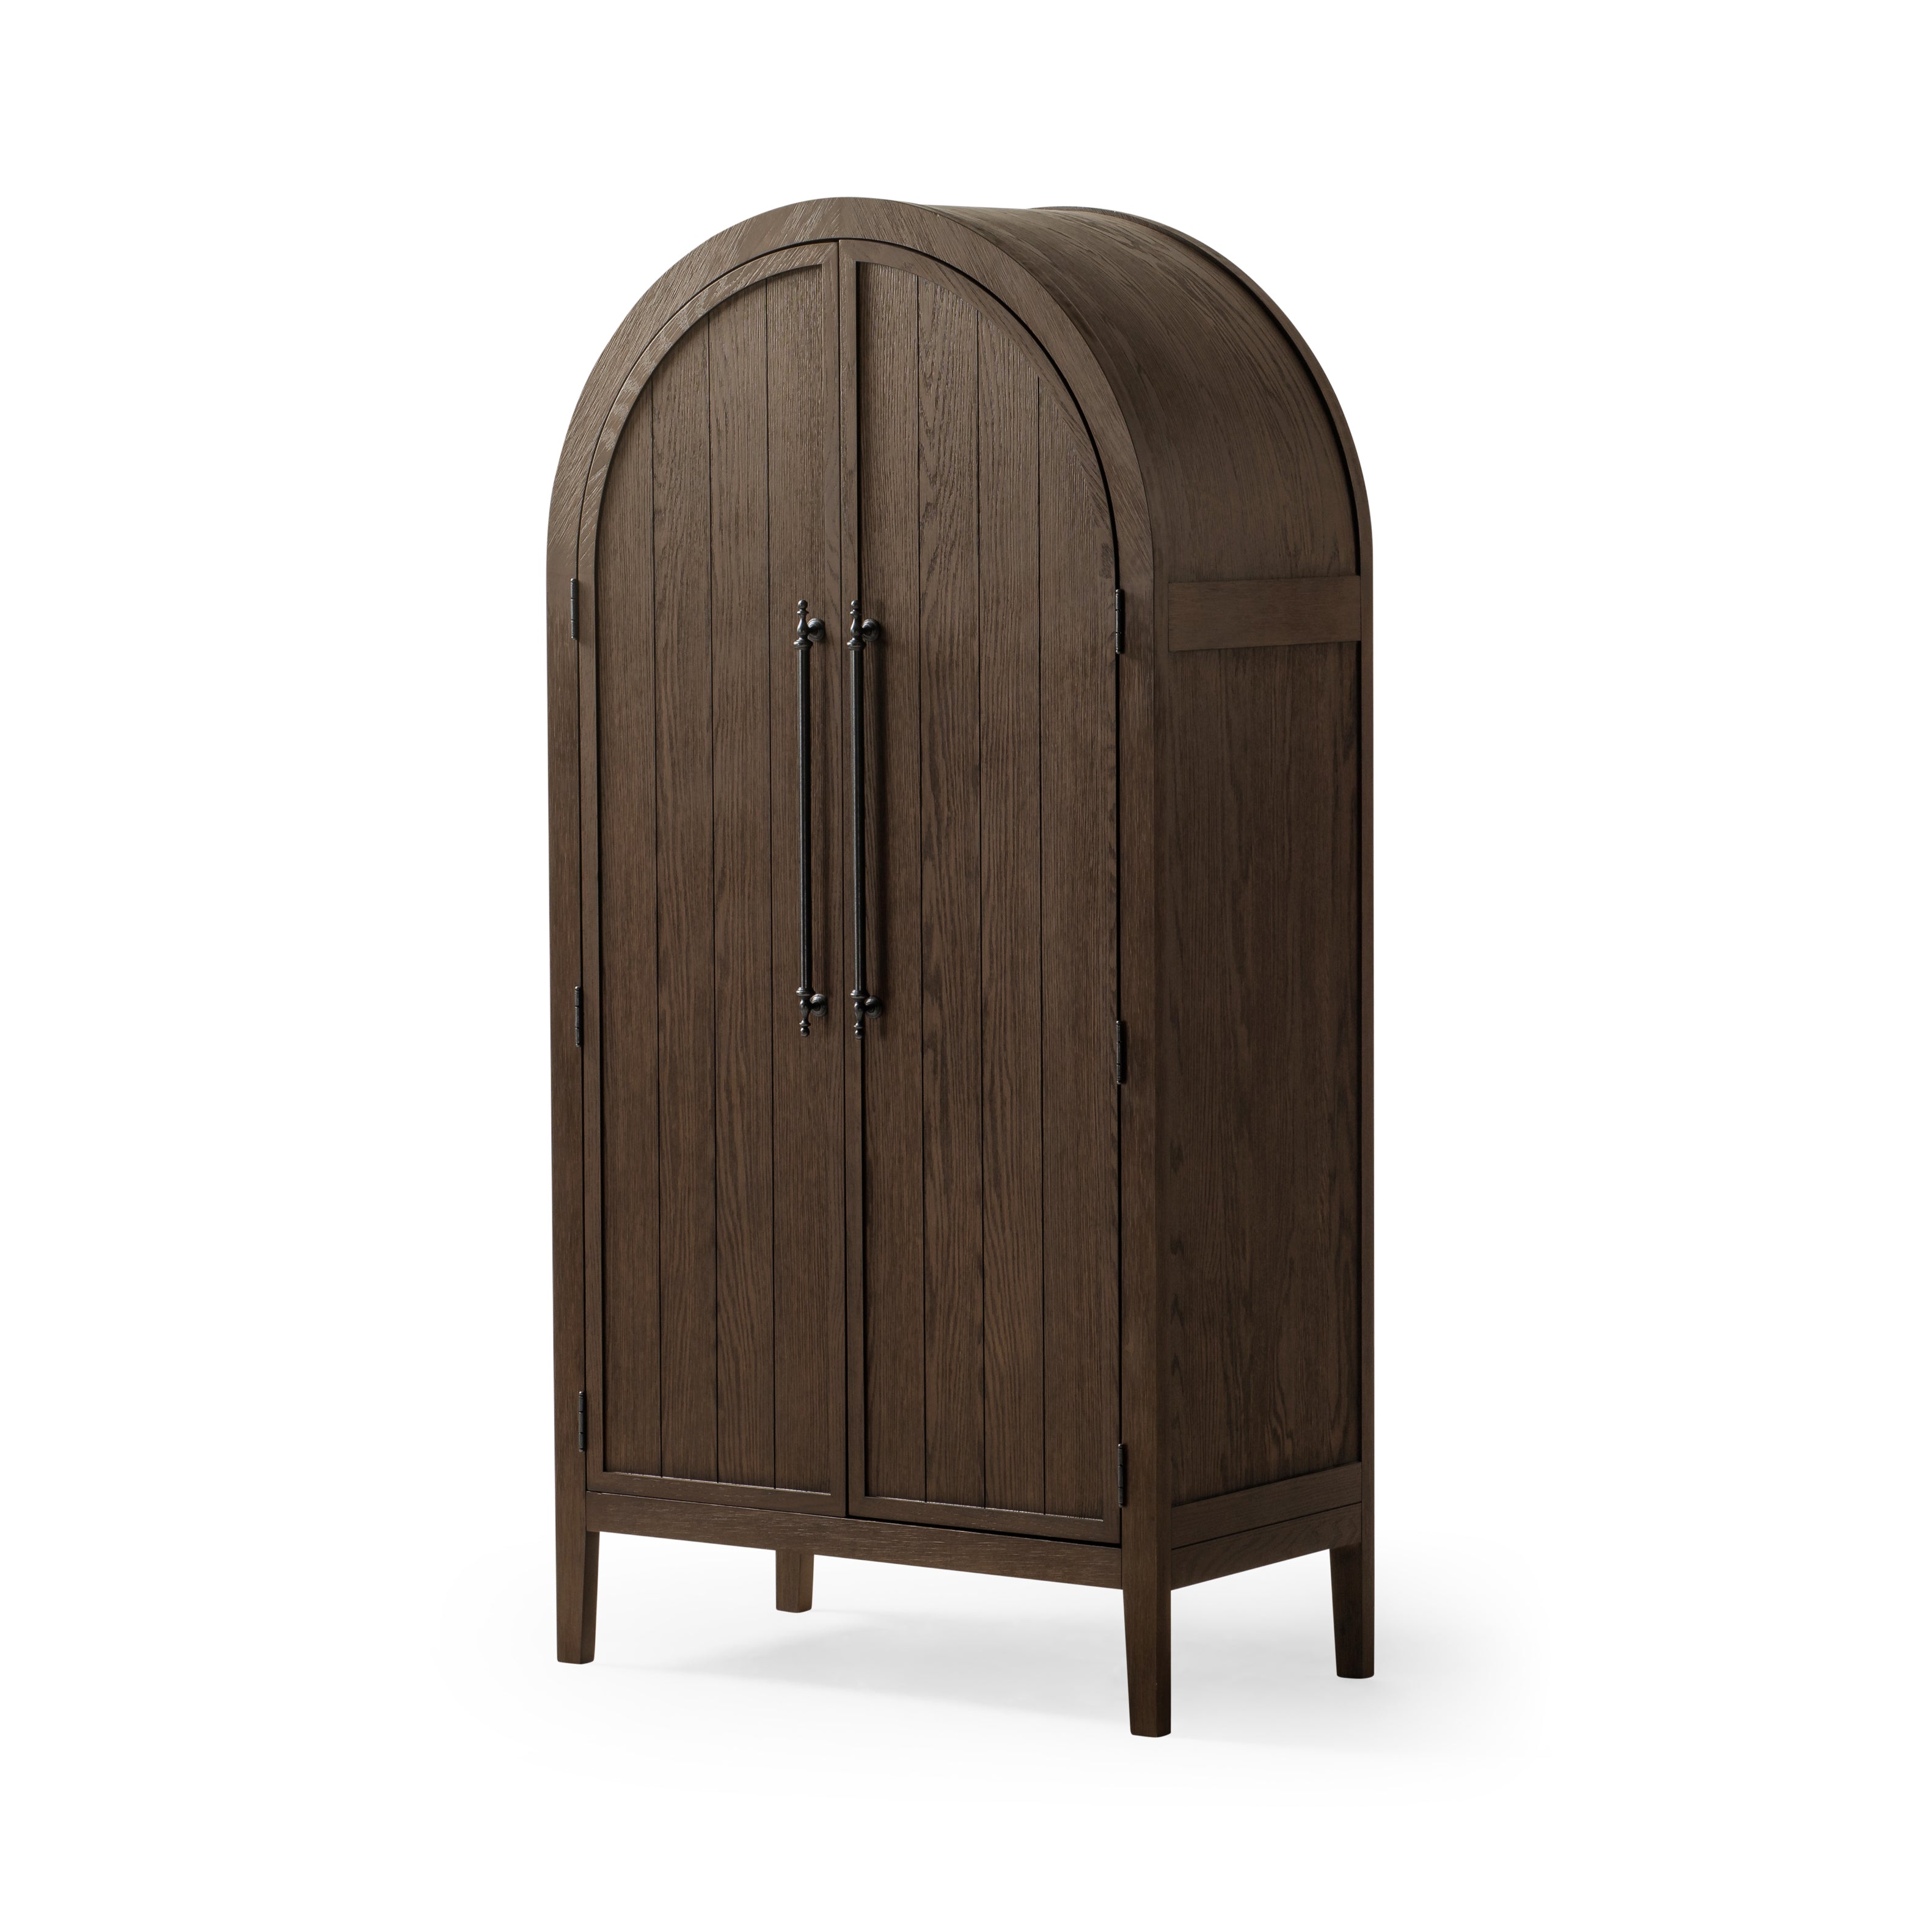 Selene Classical Wooden Cabinet in Antiqued Brown Finish in Cabinets by Maven Lane